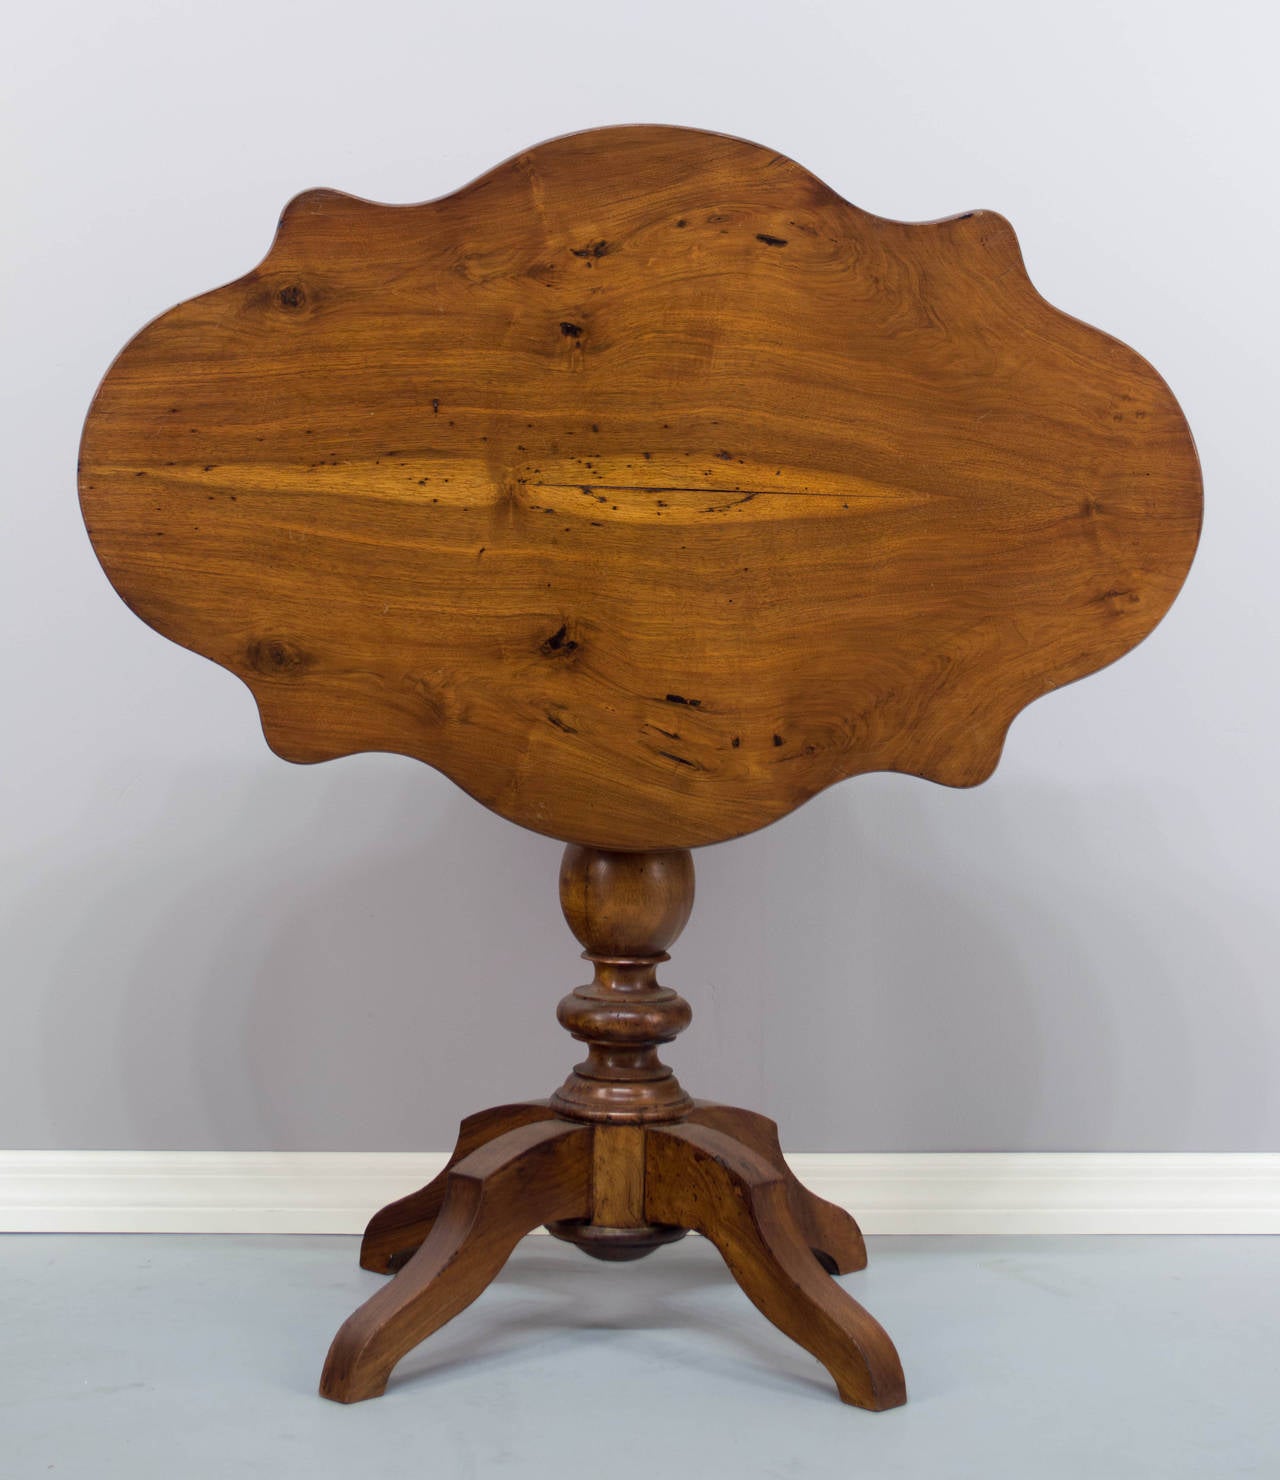 A 19th century Louis Philippe style walnut gueridon with bookmatched board. 43.5 inches tall when top is tilted up. Waxed finish.
More photos available upon request. We have a large selection of French antiques. Please visit our showroom in Winter